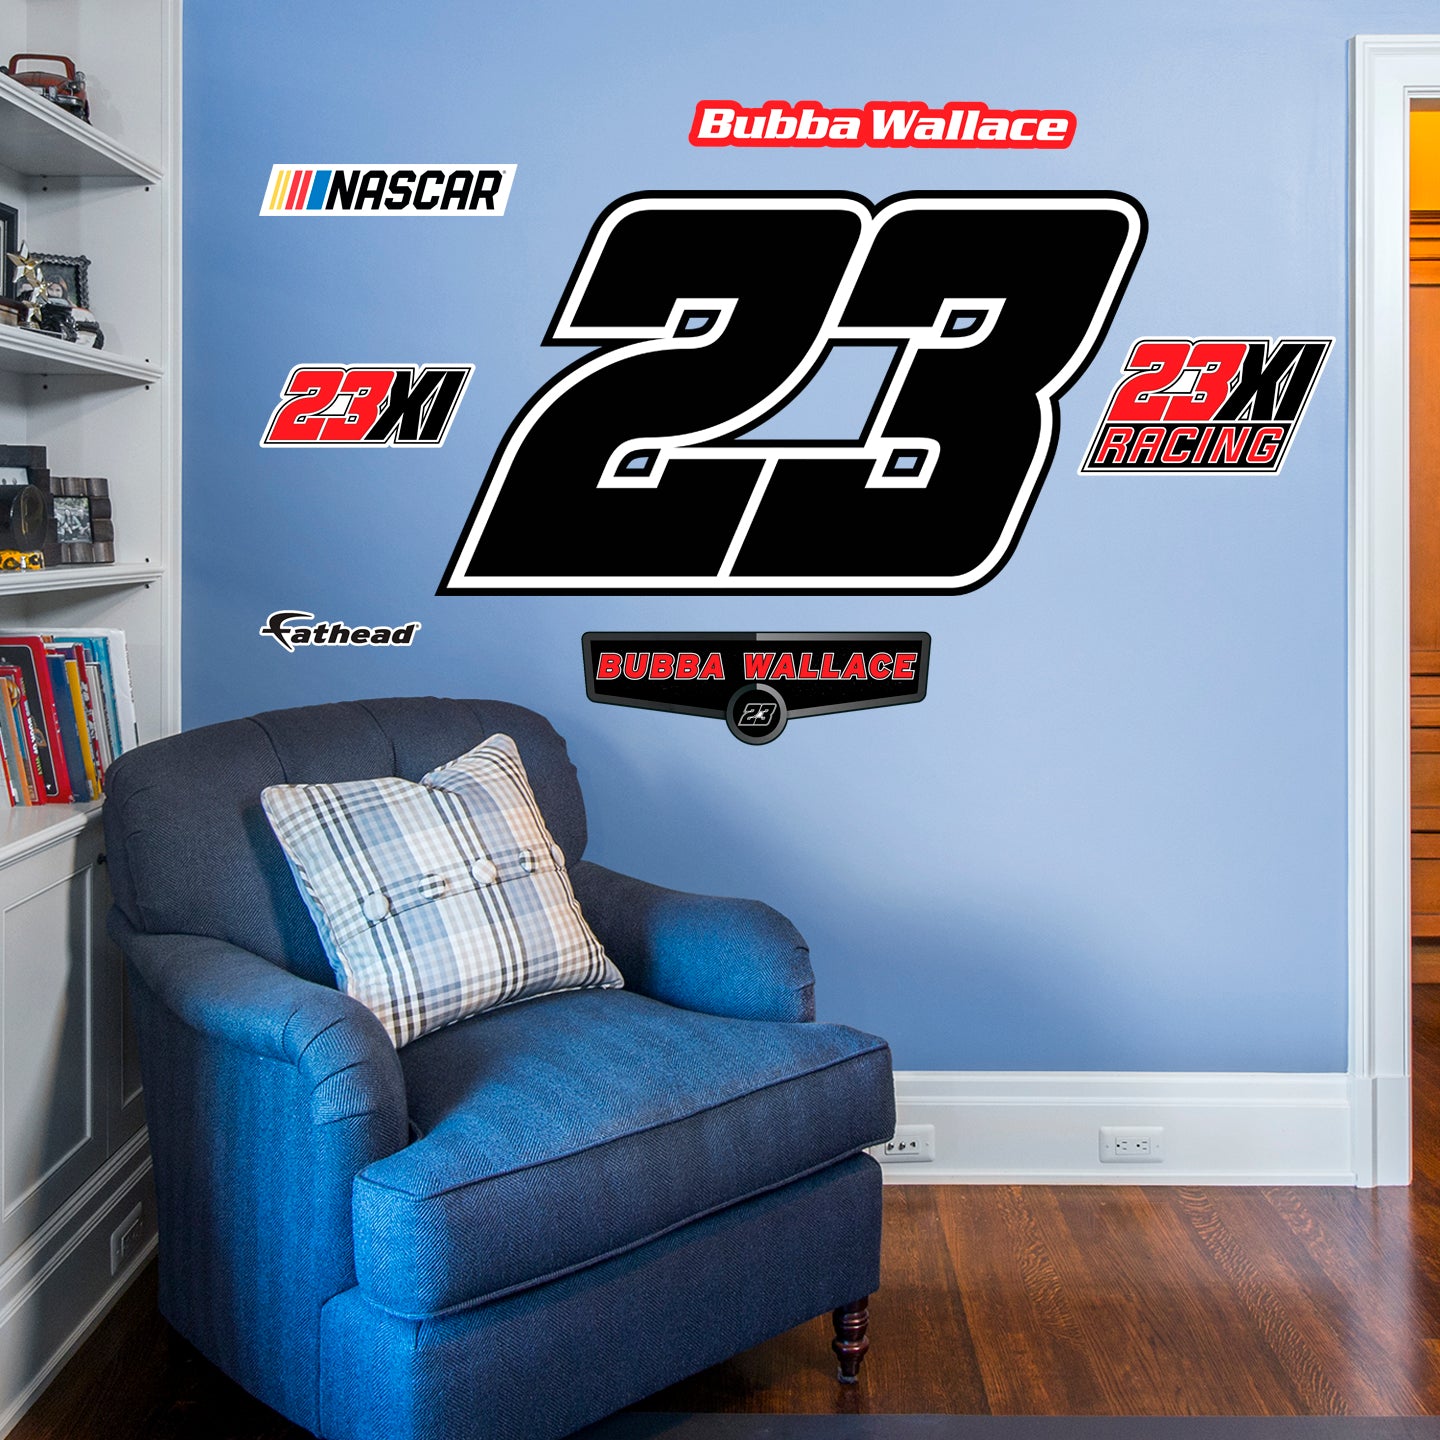 Bubba Wallace 2021 #23 Logo - Officially Licensed NASCAR Removable Wall Decal Giant Logo + 6 Decals (29"W x 51"H) by Fathead | V